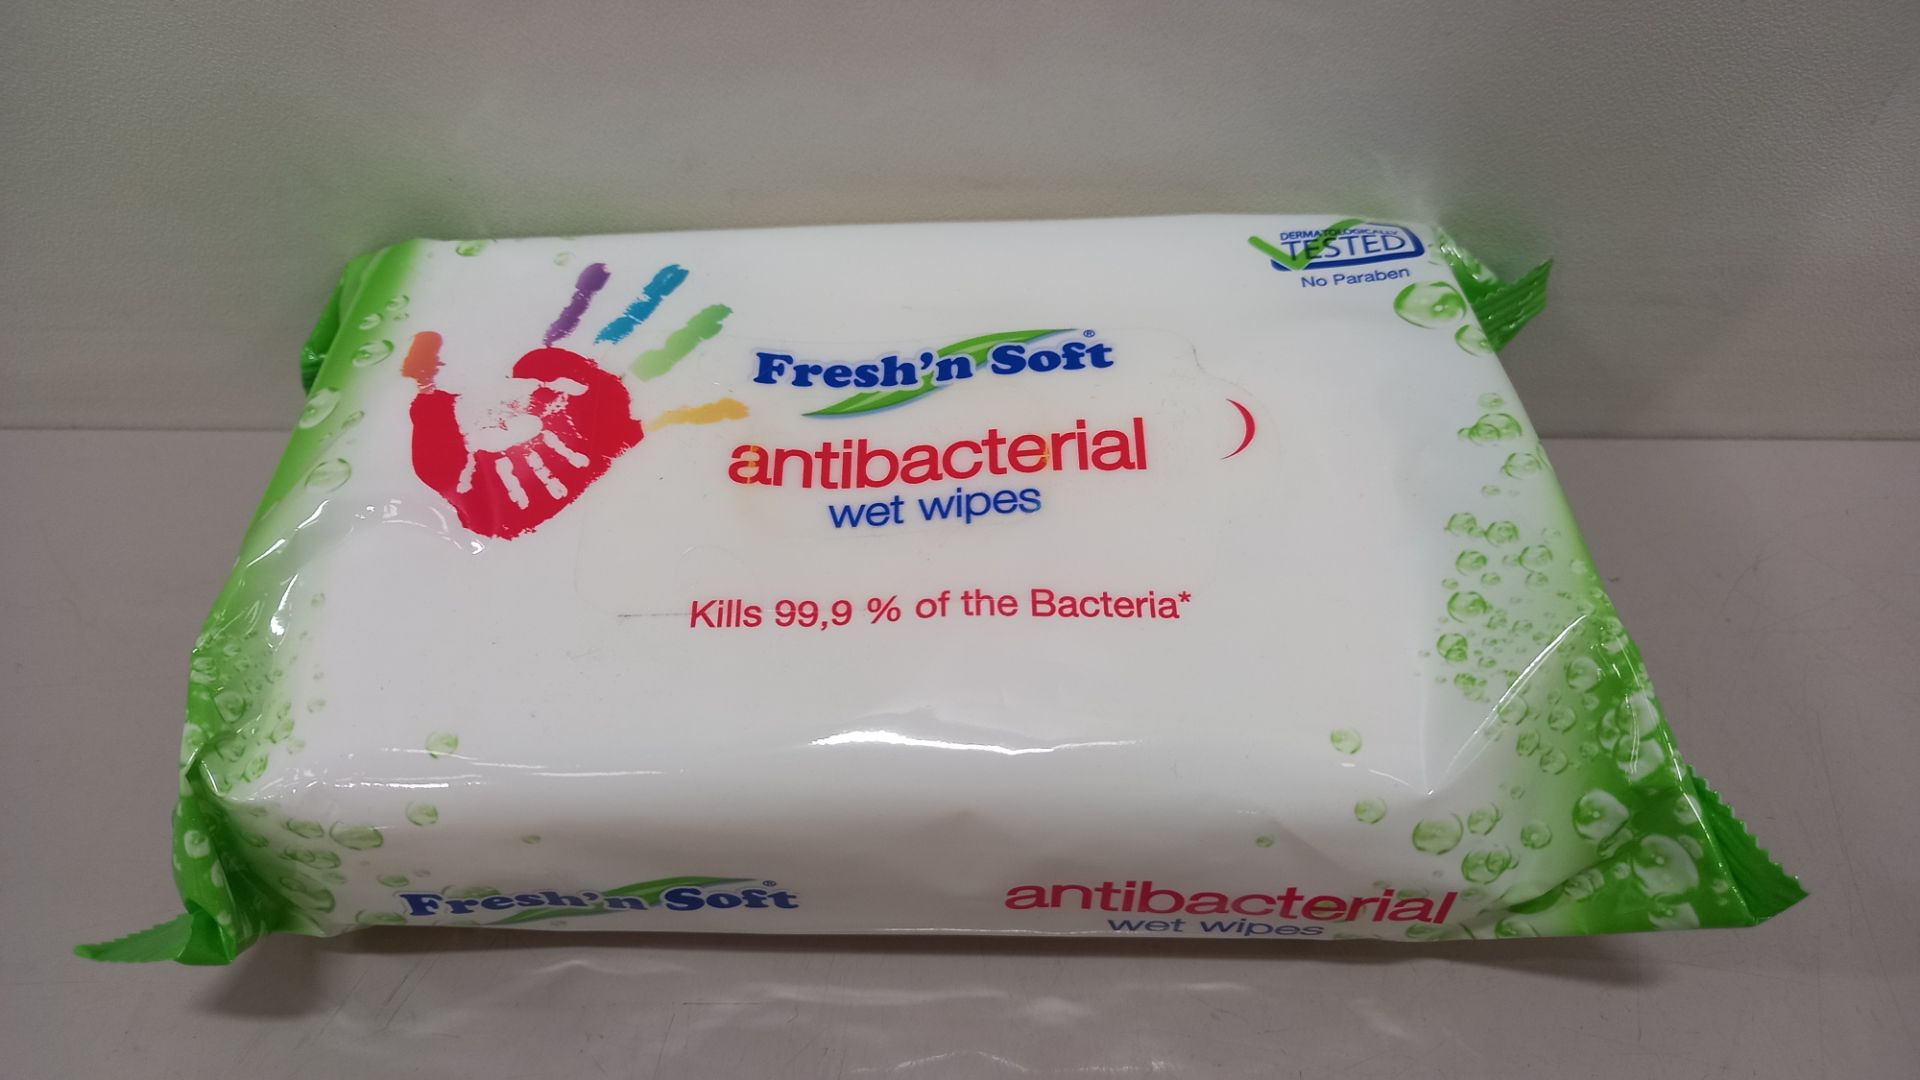 288 X BRAND NEW FRESH N SOFT ANTIBACTERIAL WET WIPES (DERMATOLOGICALLY TESTED / NO PARABEN) - 60